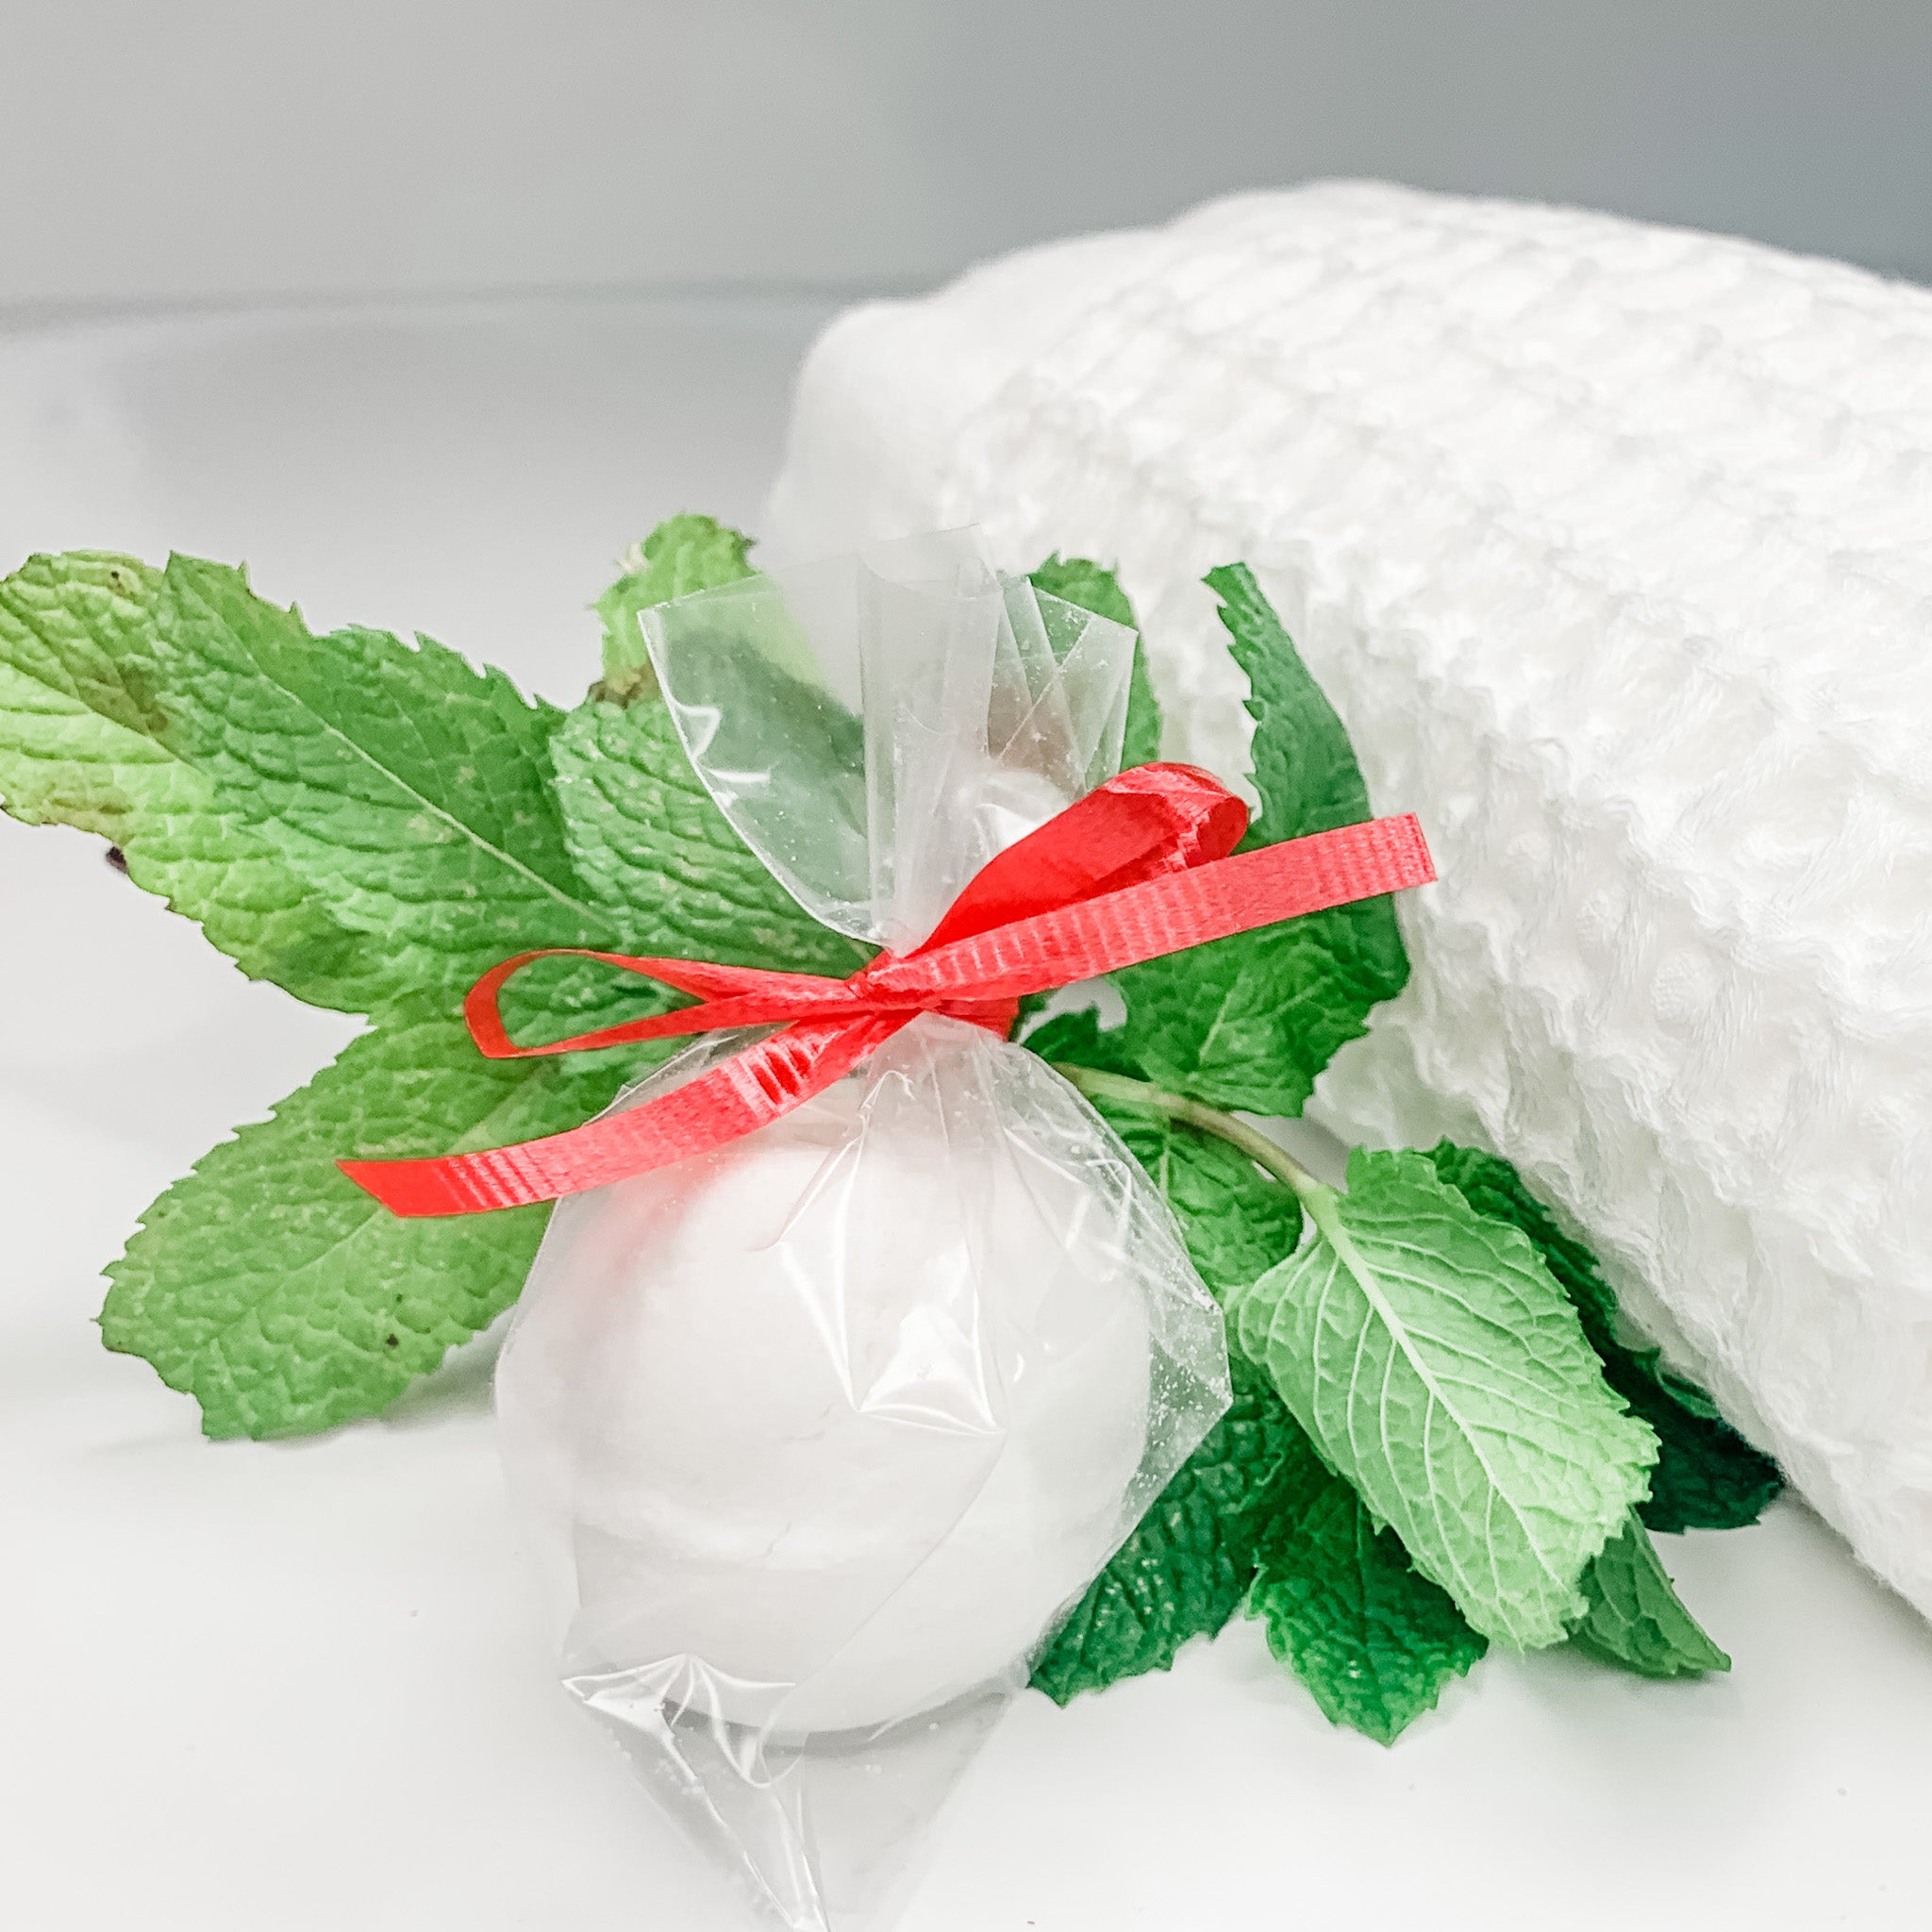 Hand Crafted Bath Bombs with Shea Butter and Peppermint EO